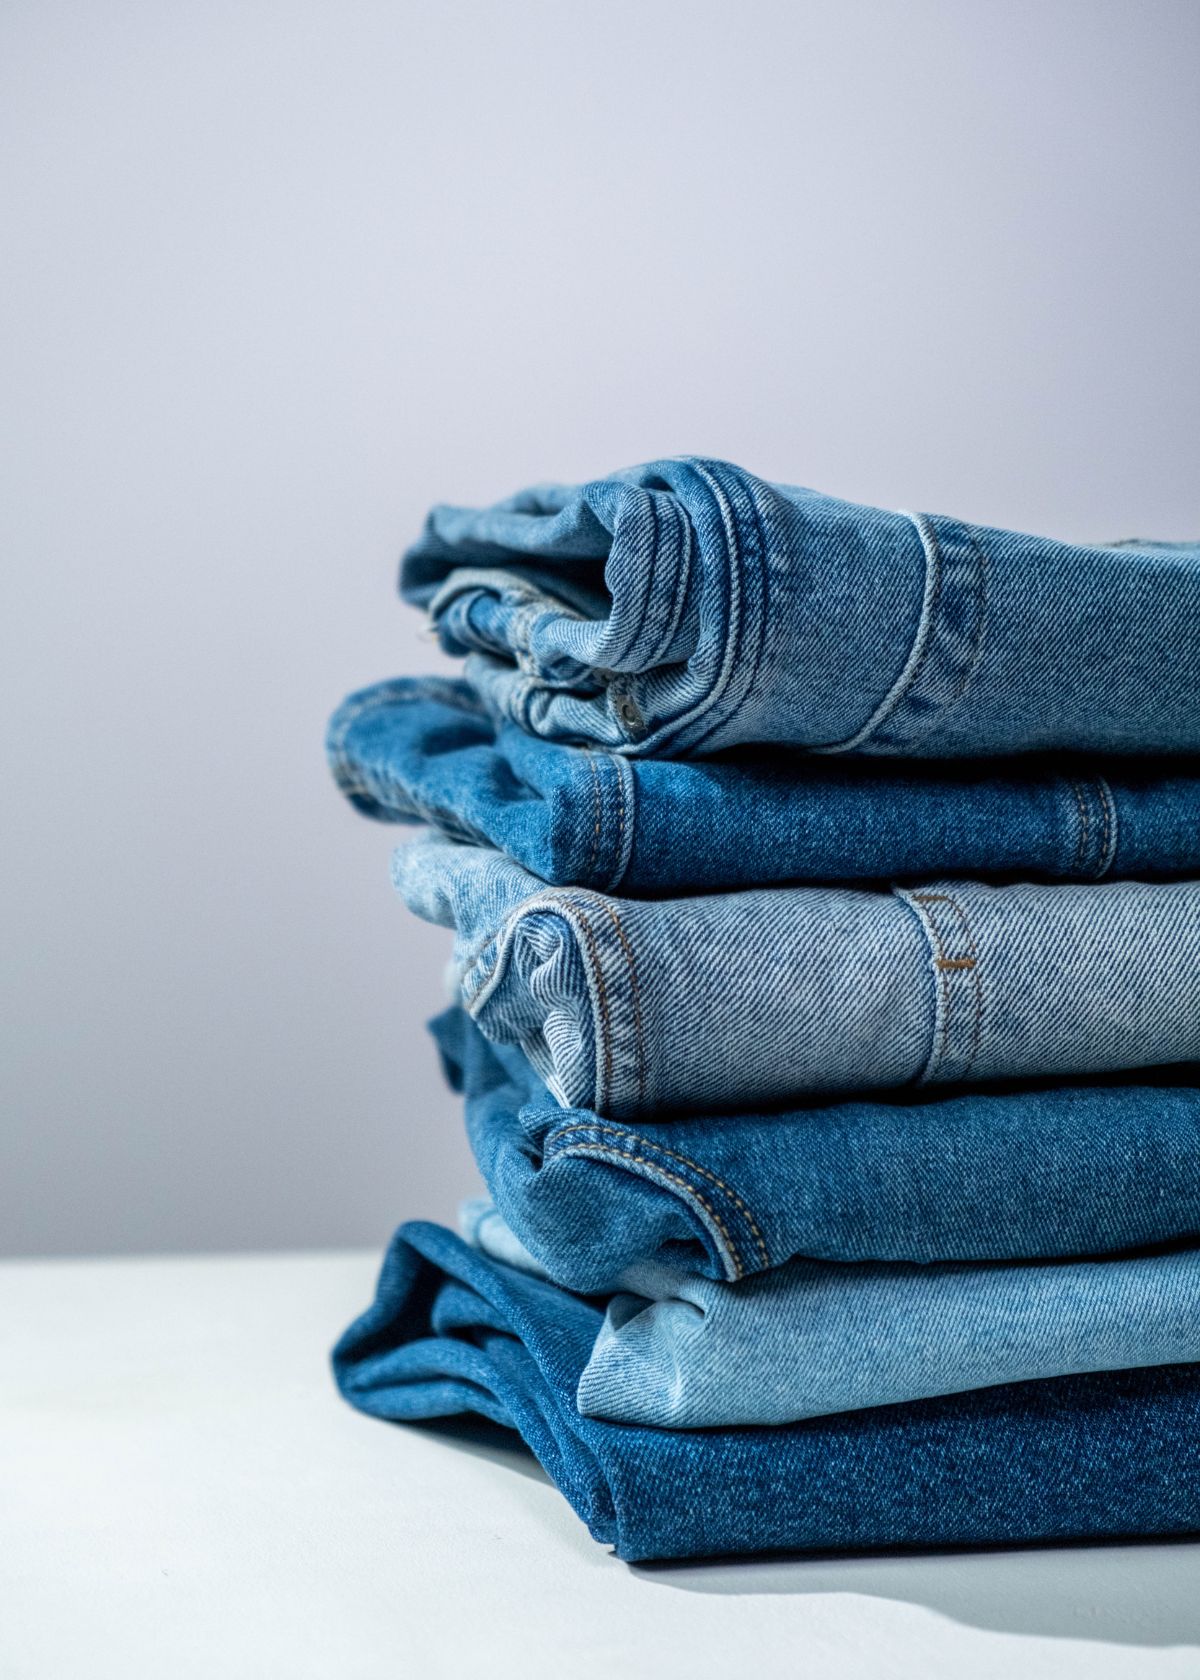 Pile of denim blue jeans - How to organize jeans